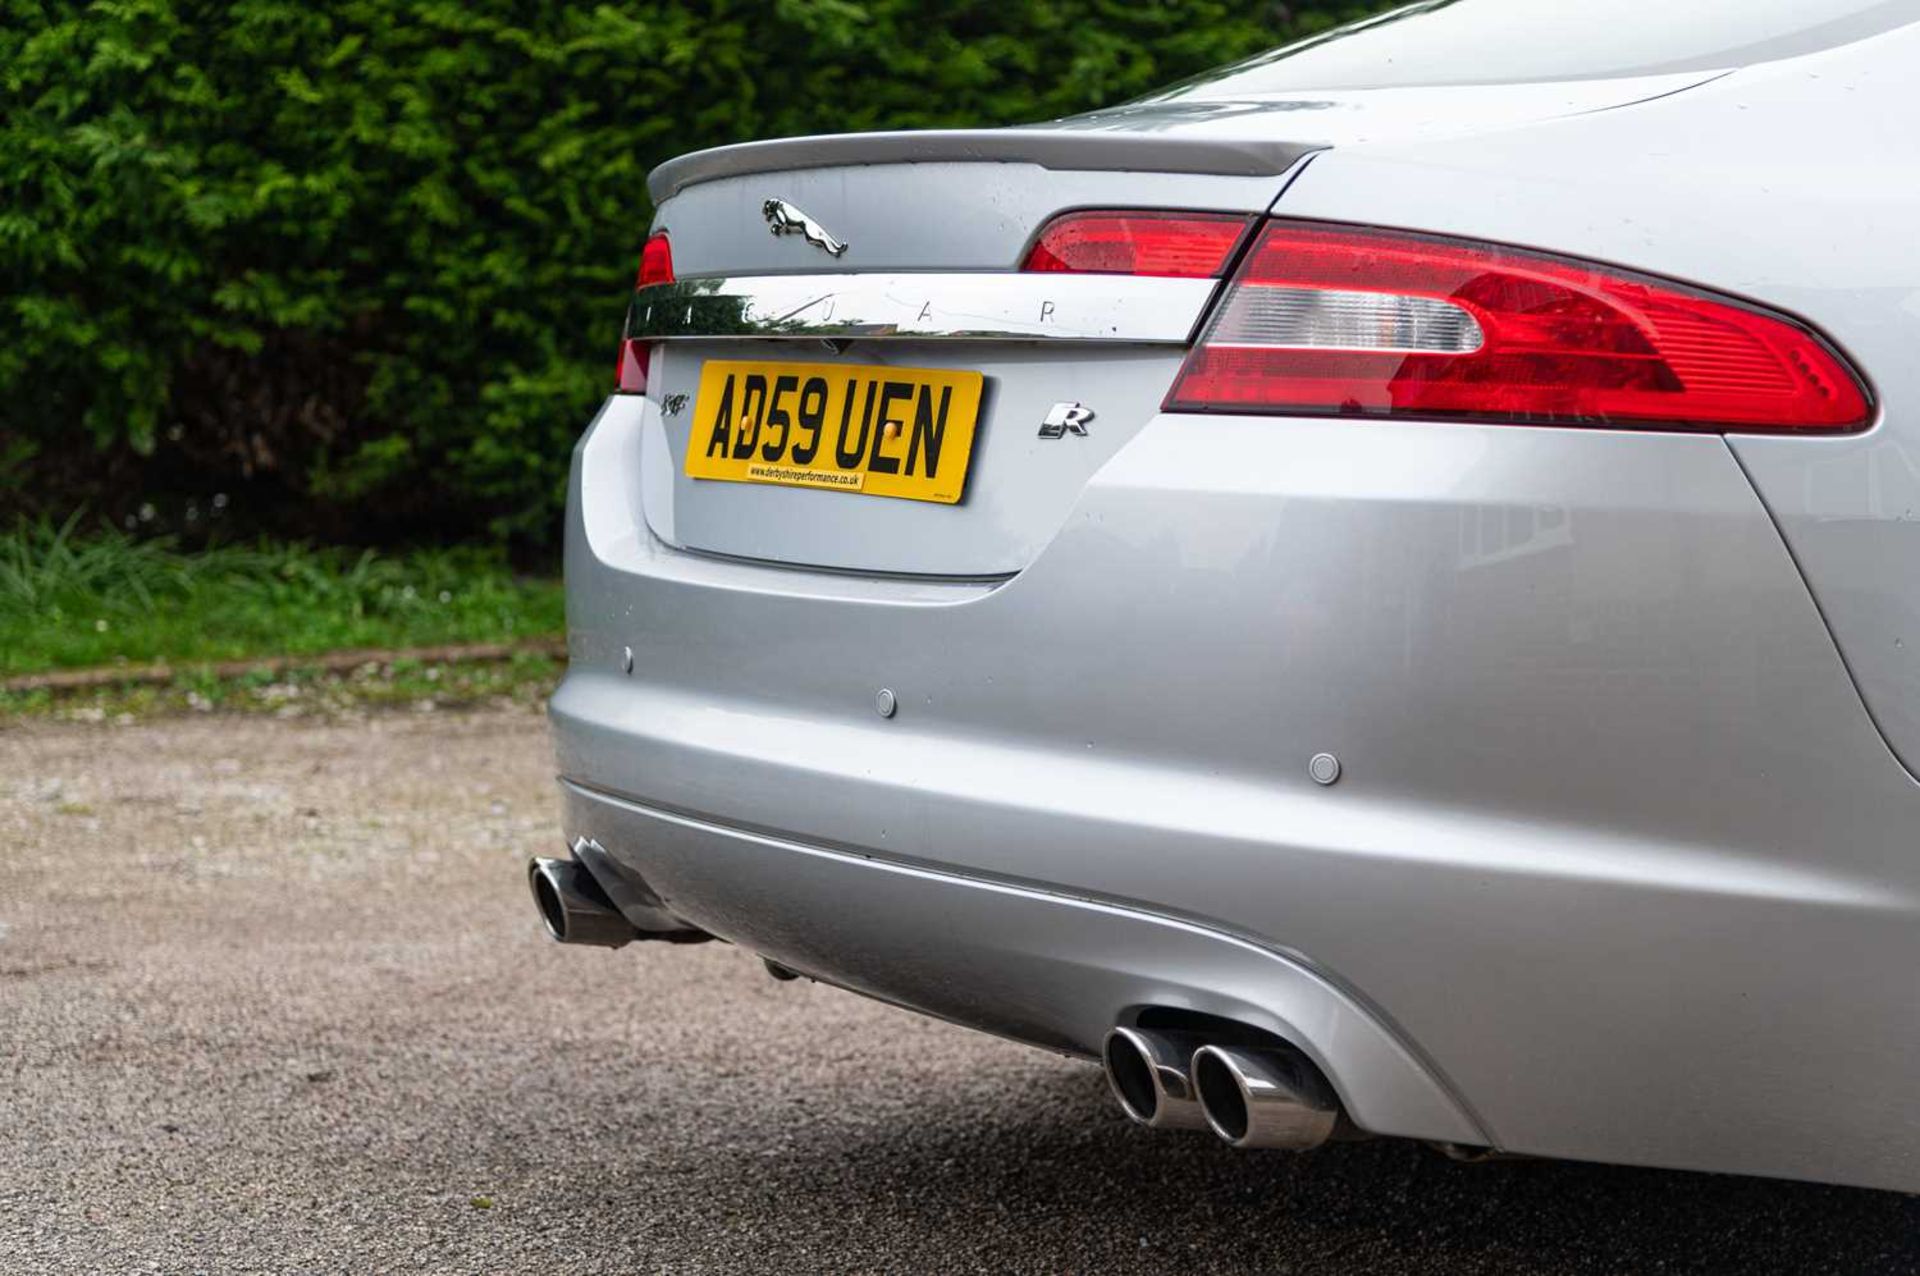 2009 Jaguar XFR Saloon 500 horsepower four-door super saloon, with full service history - Image 28 of 81